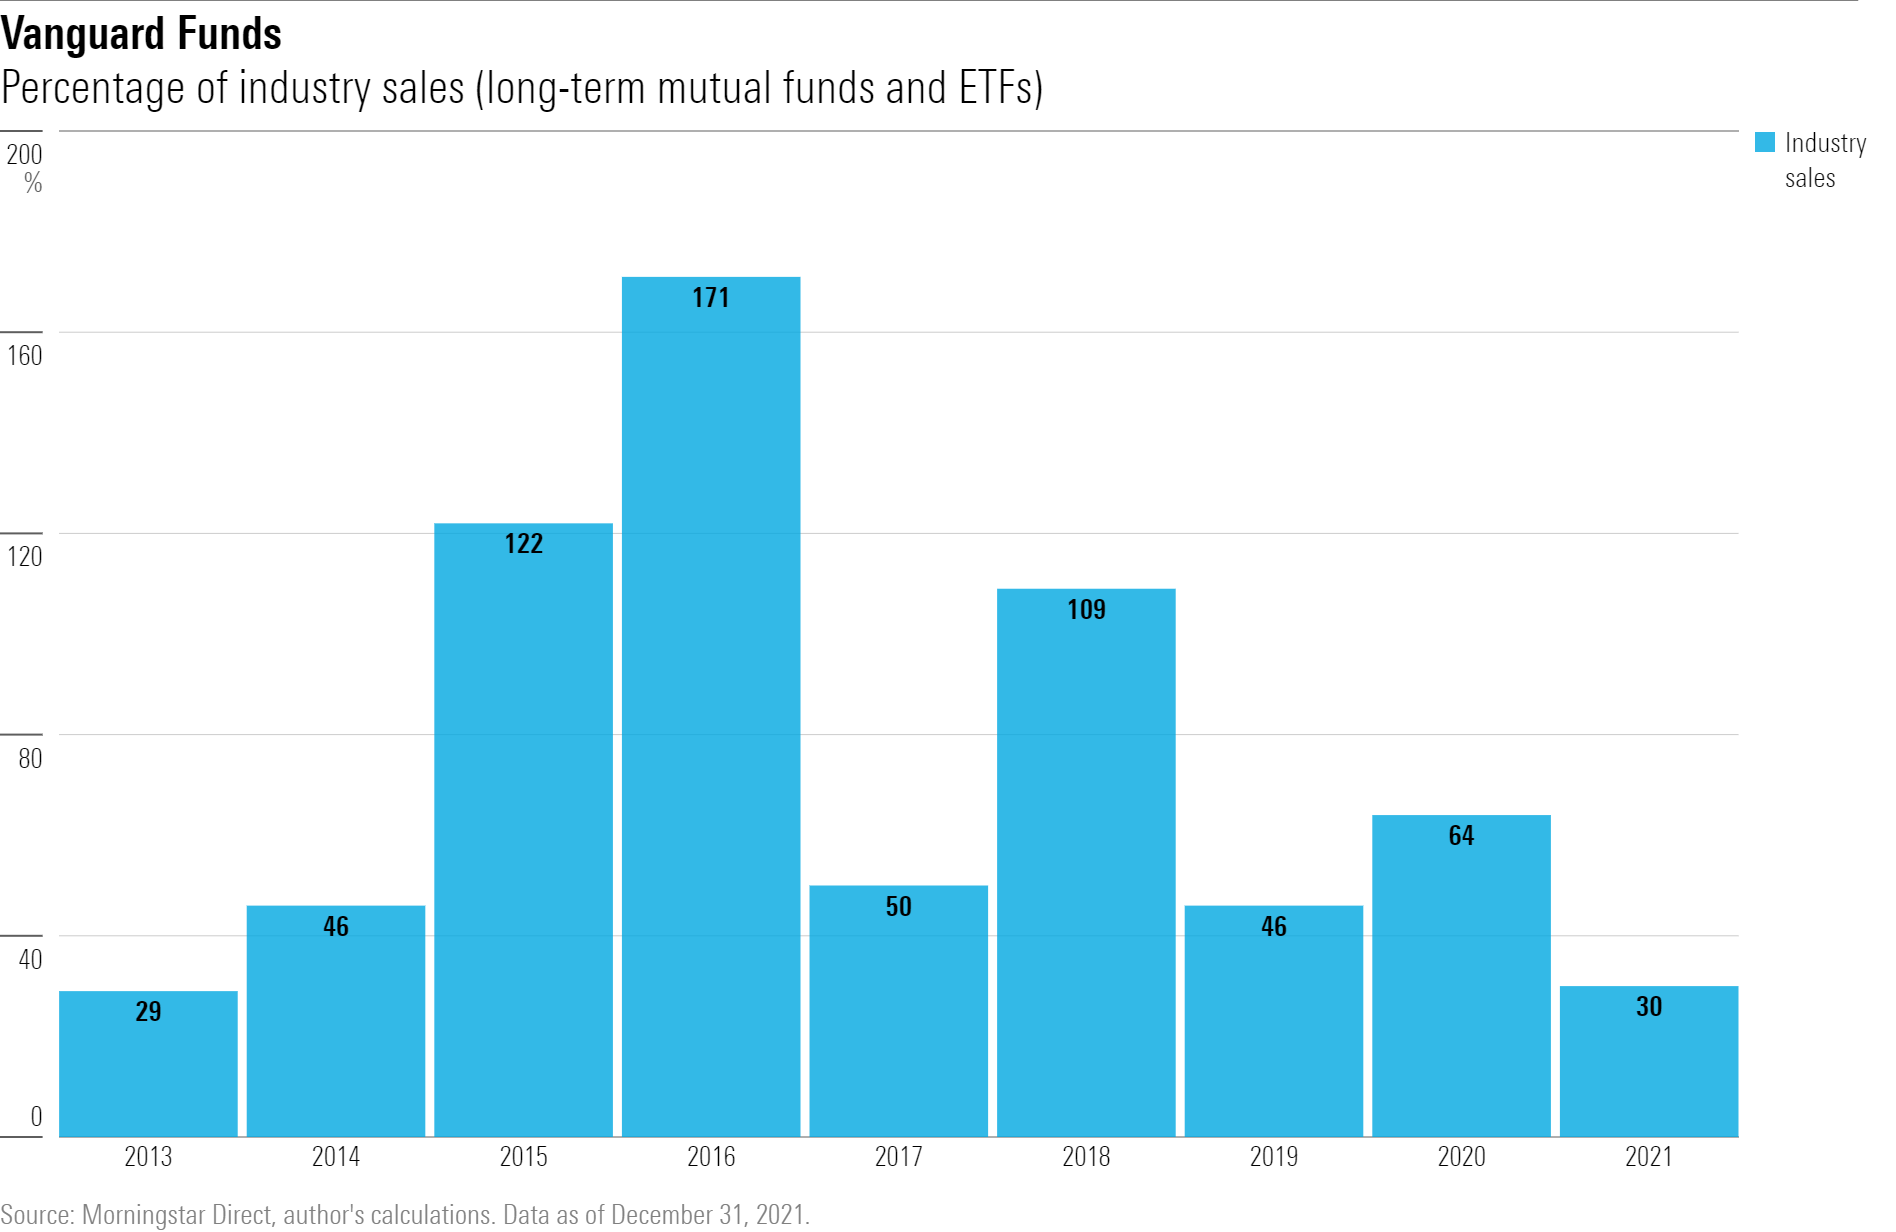 The percentage of fund industry sales, from 2013 though 2021, accounted for by Vanguard funds.